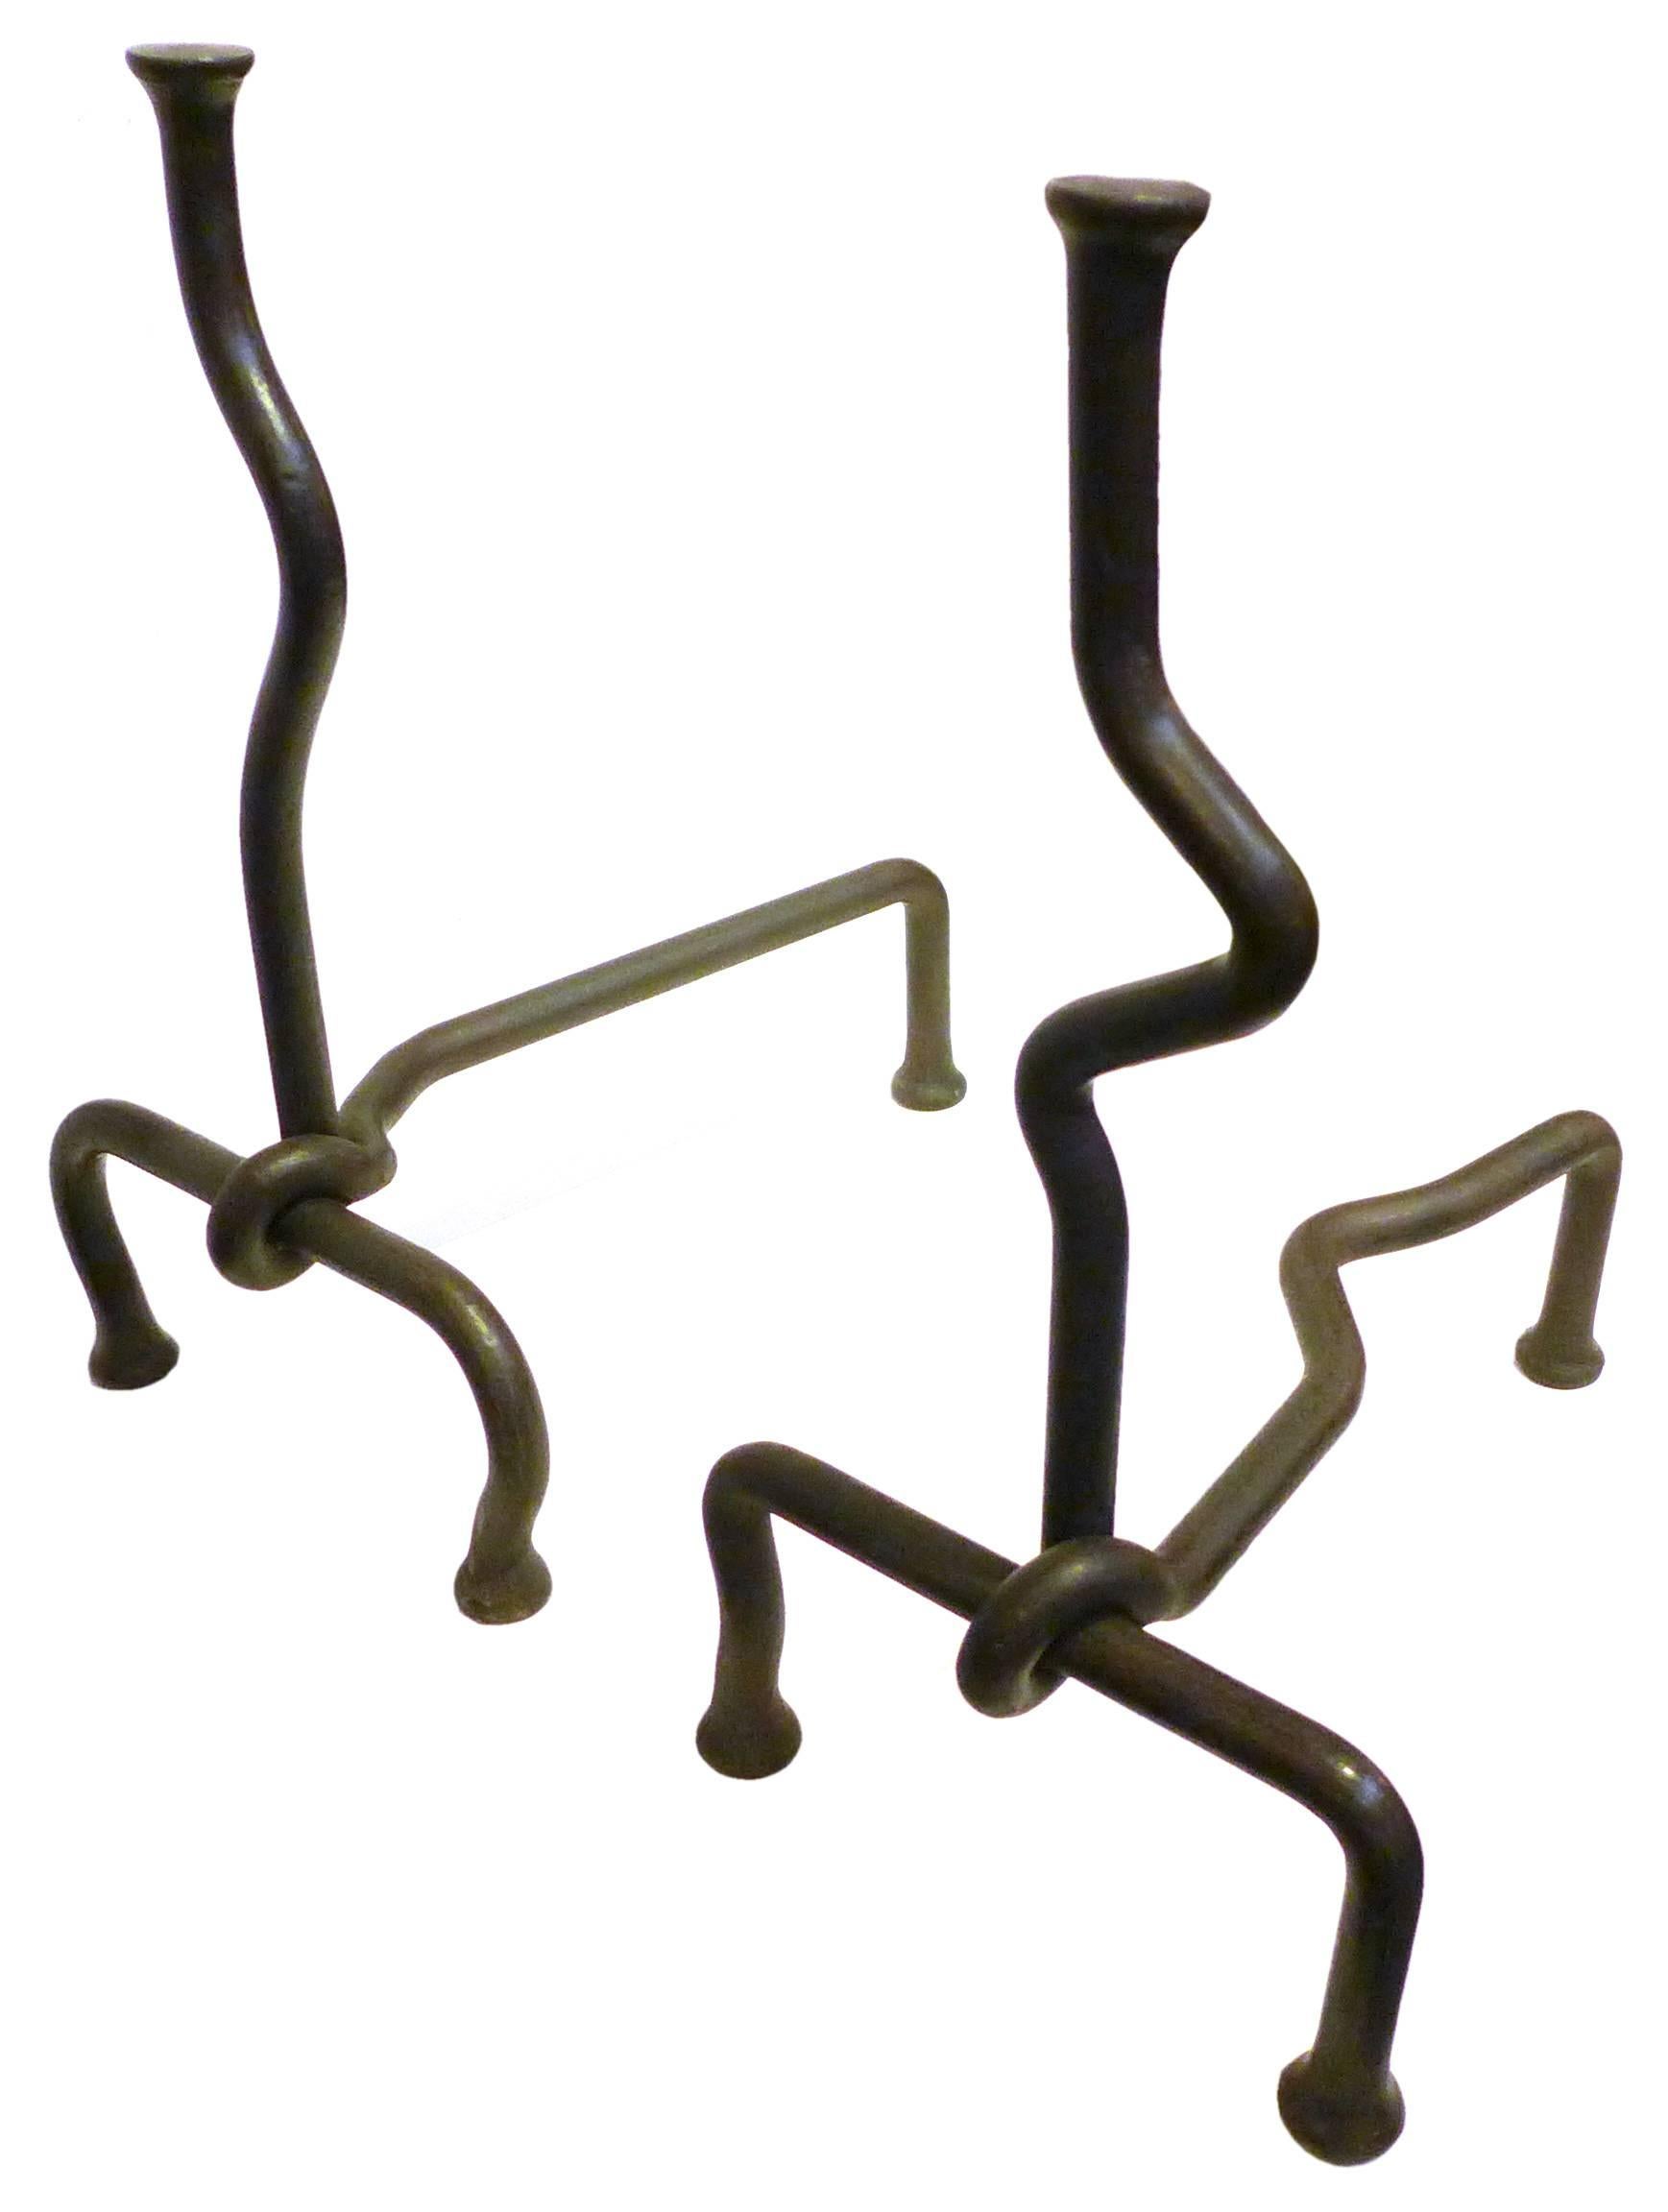 A playful pair of intentionally mismatched, hand-wrought andirons. Beautifully simple, animated, sculptural forms, each of one squiggled, iron rod twisting around another. Unexpectedly and delightfully dynamic for both the material and use,